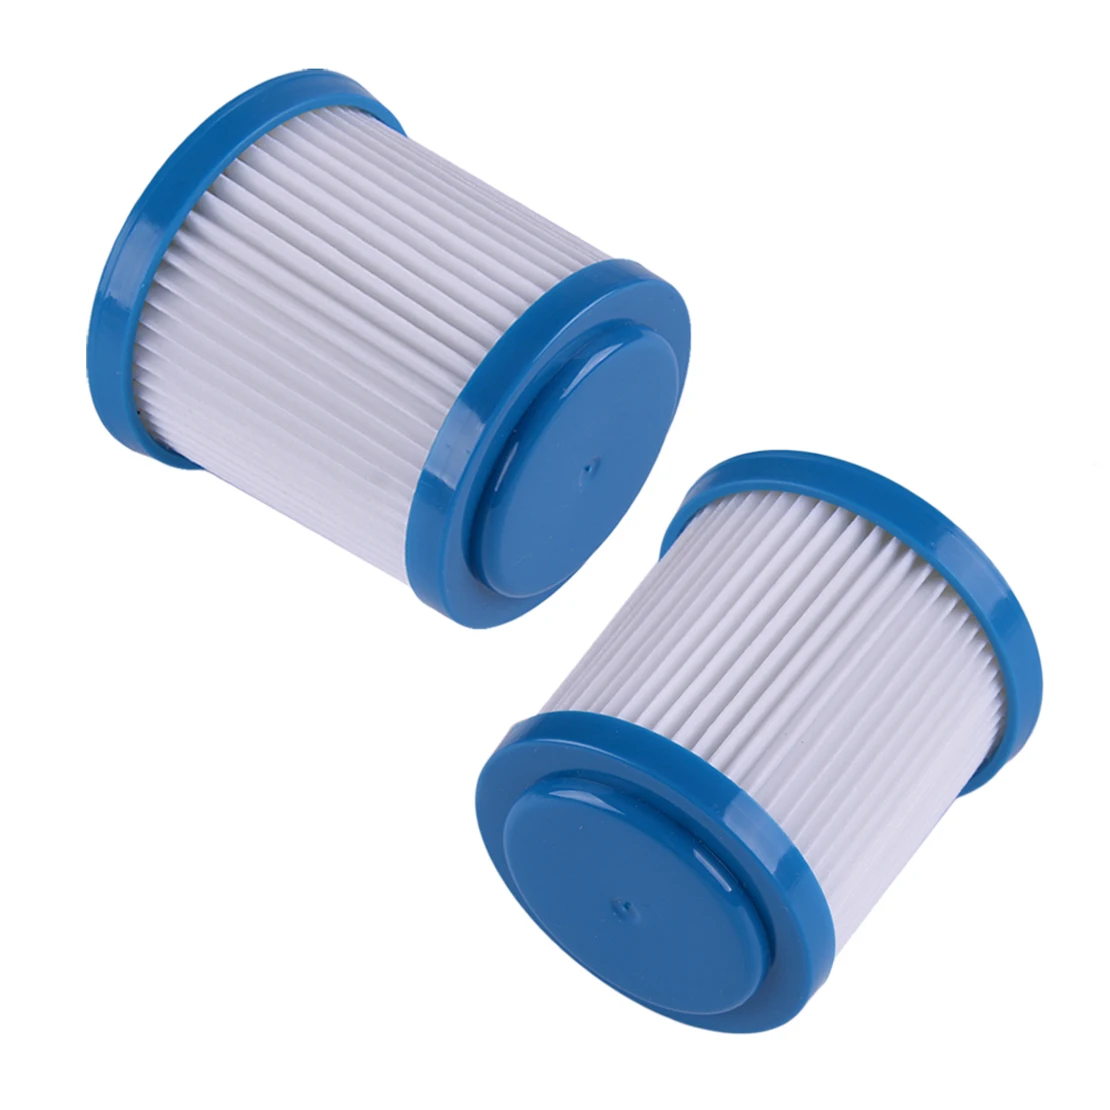 

High Quality 2PCS Vacuum Filter Cores Fit for Black and Decker Cleaner HFEJ415JWMF VPF20